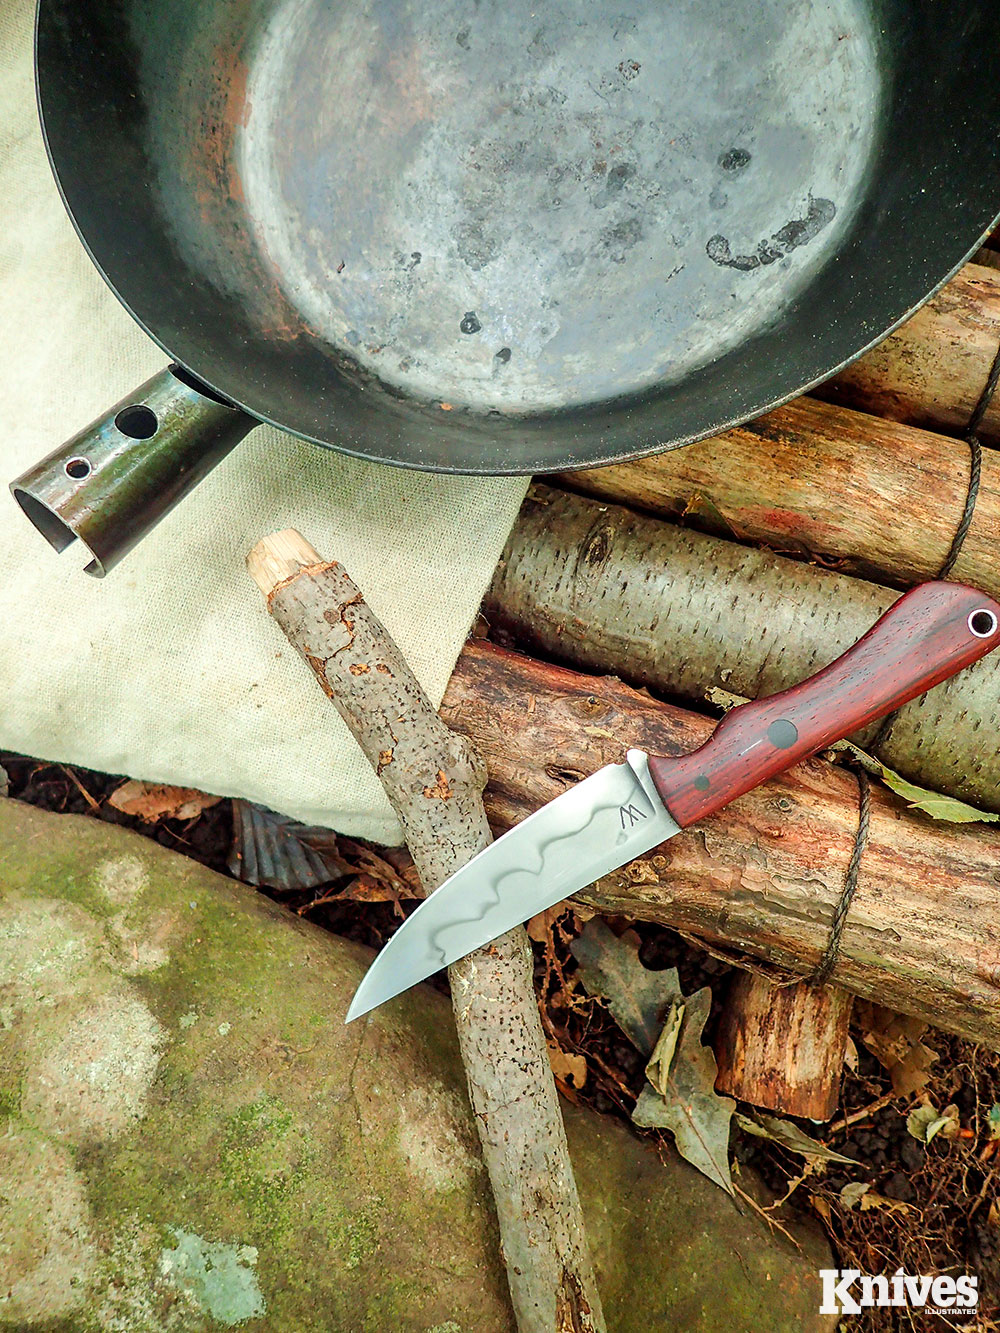 The Norfolk was the consummate utility knife in the author’s camp.